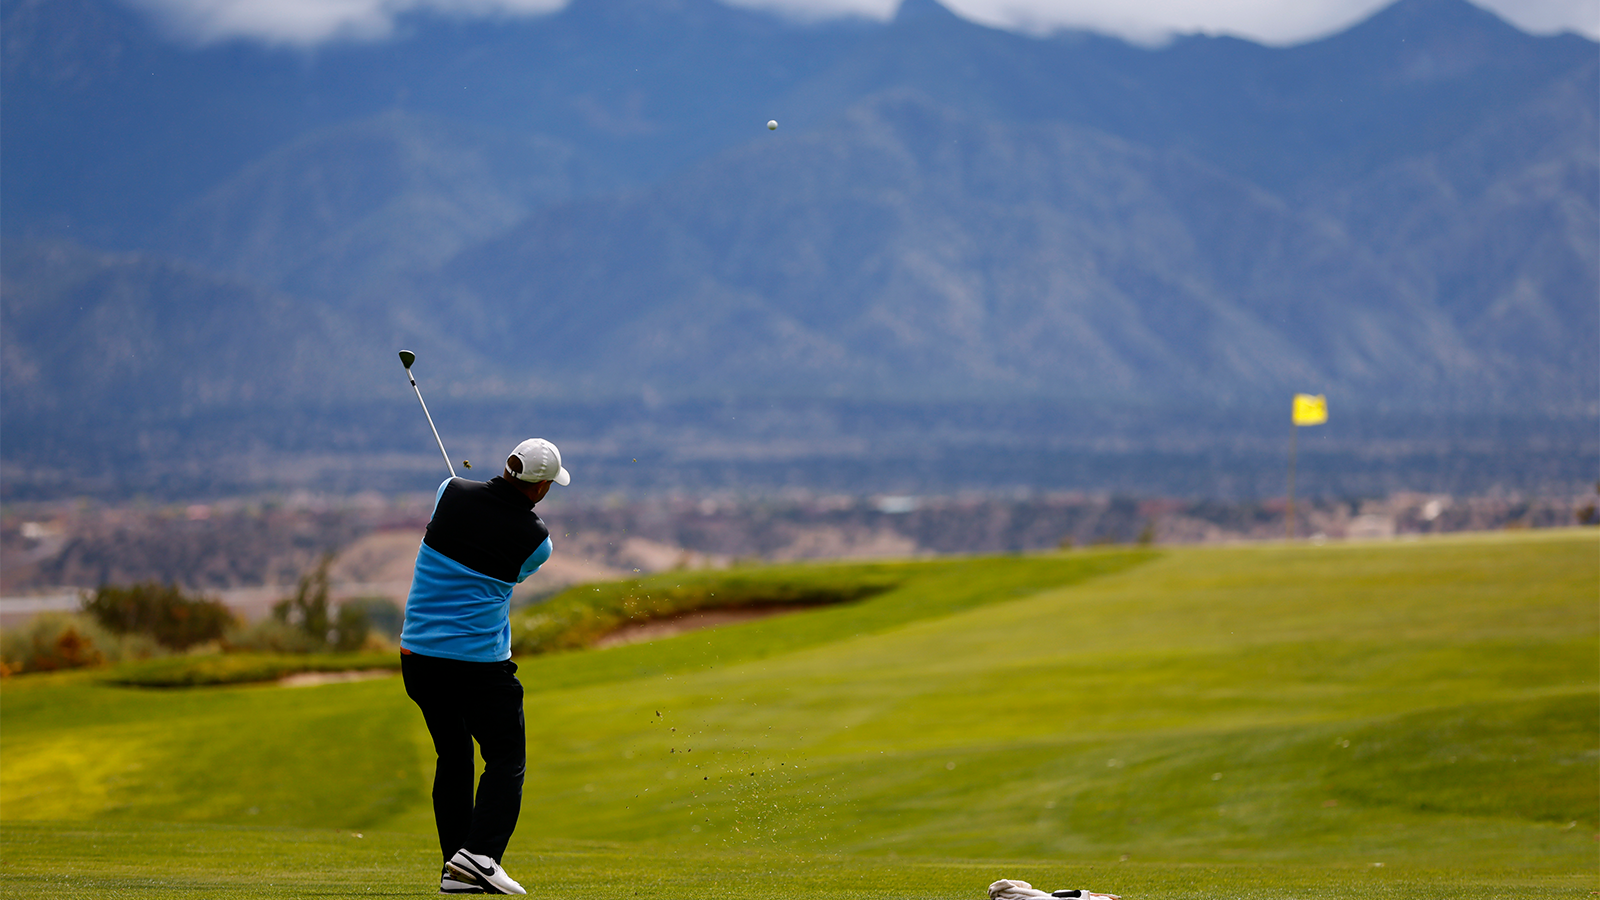 Matt Schalk hits his shot on the eighth hole during the final round of the 34th Senior PGA Professional Championship at Twin Warriors Golf Club on October 16, 2022 in Santa Ana Pueblo, New Mexico. (Photo by Justin Edmonds/PGA of America)